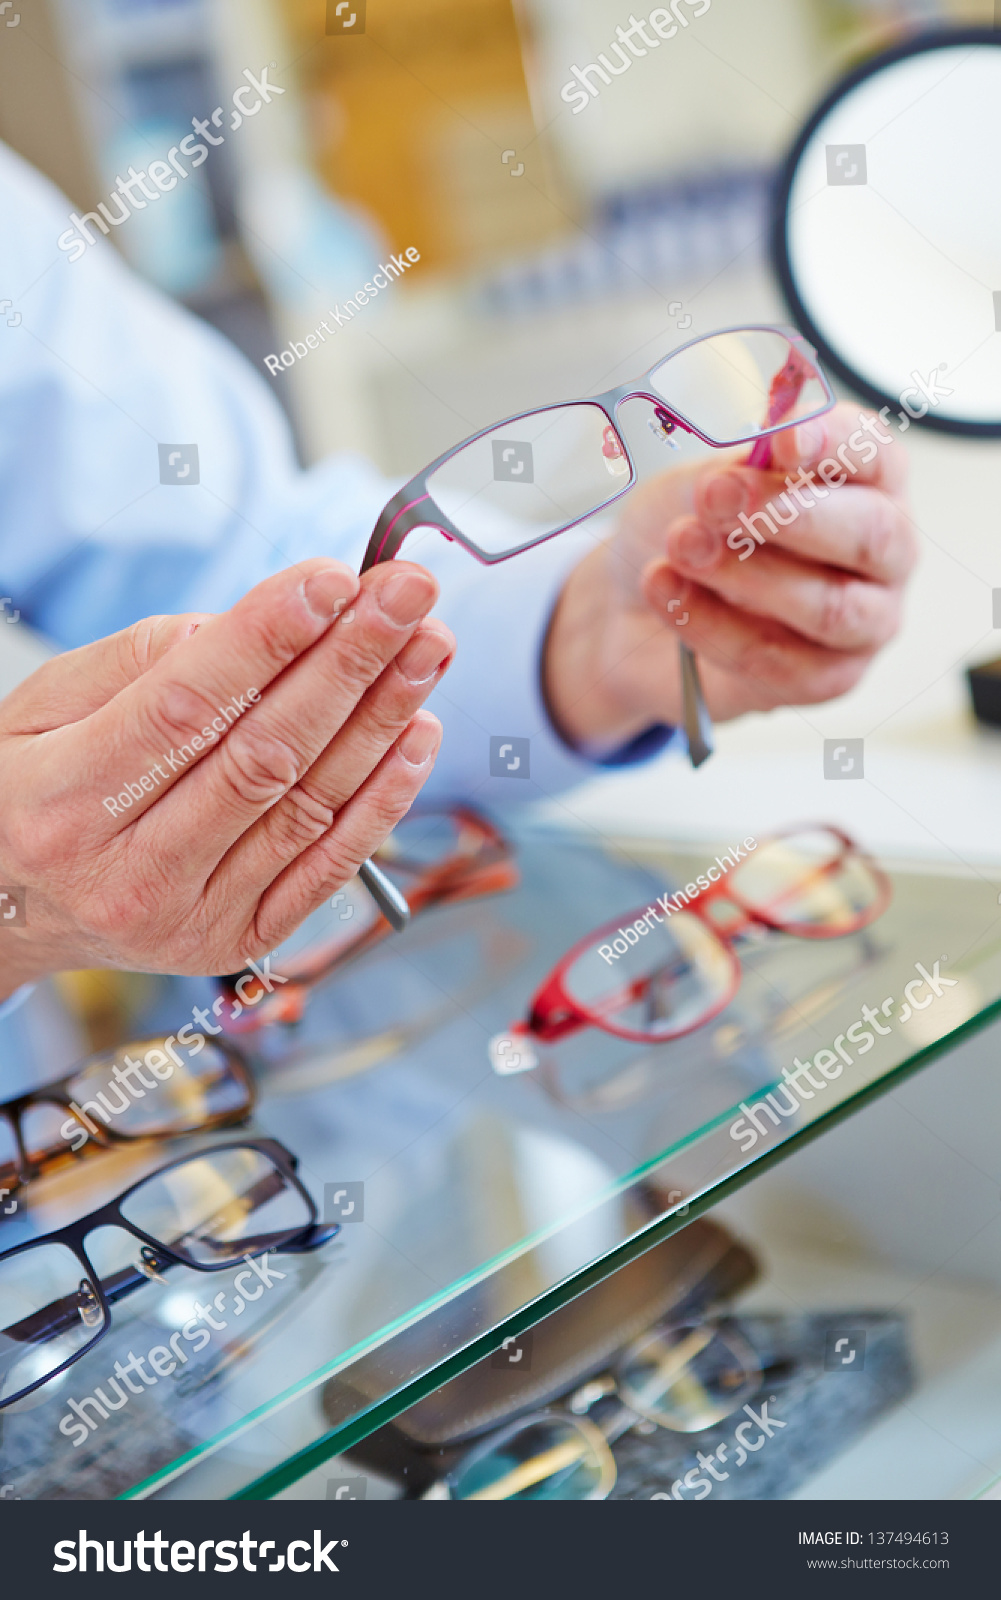 hands of an optician offering new glasses in his retail store #137494613